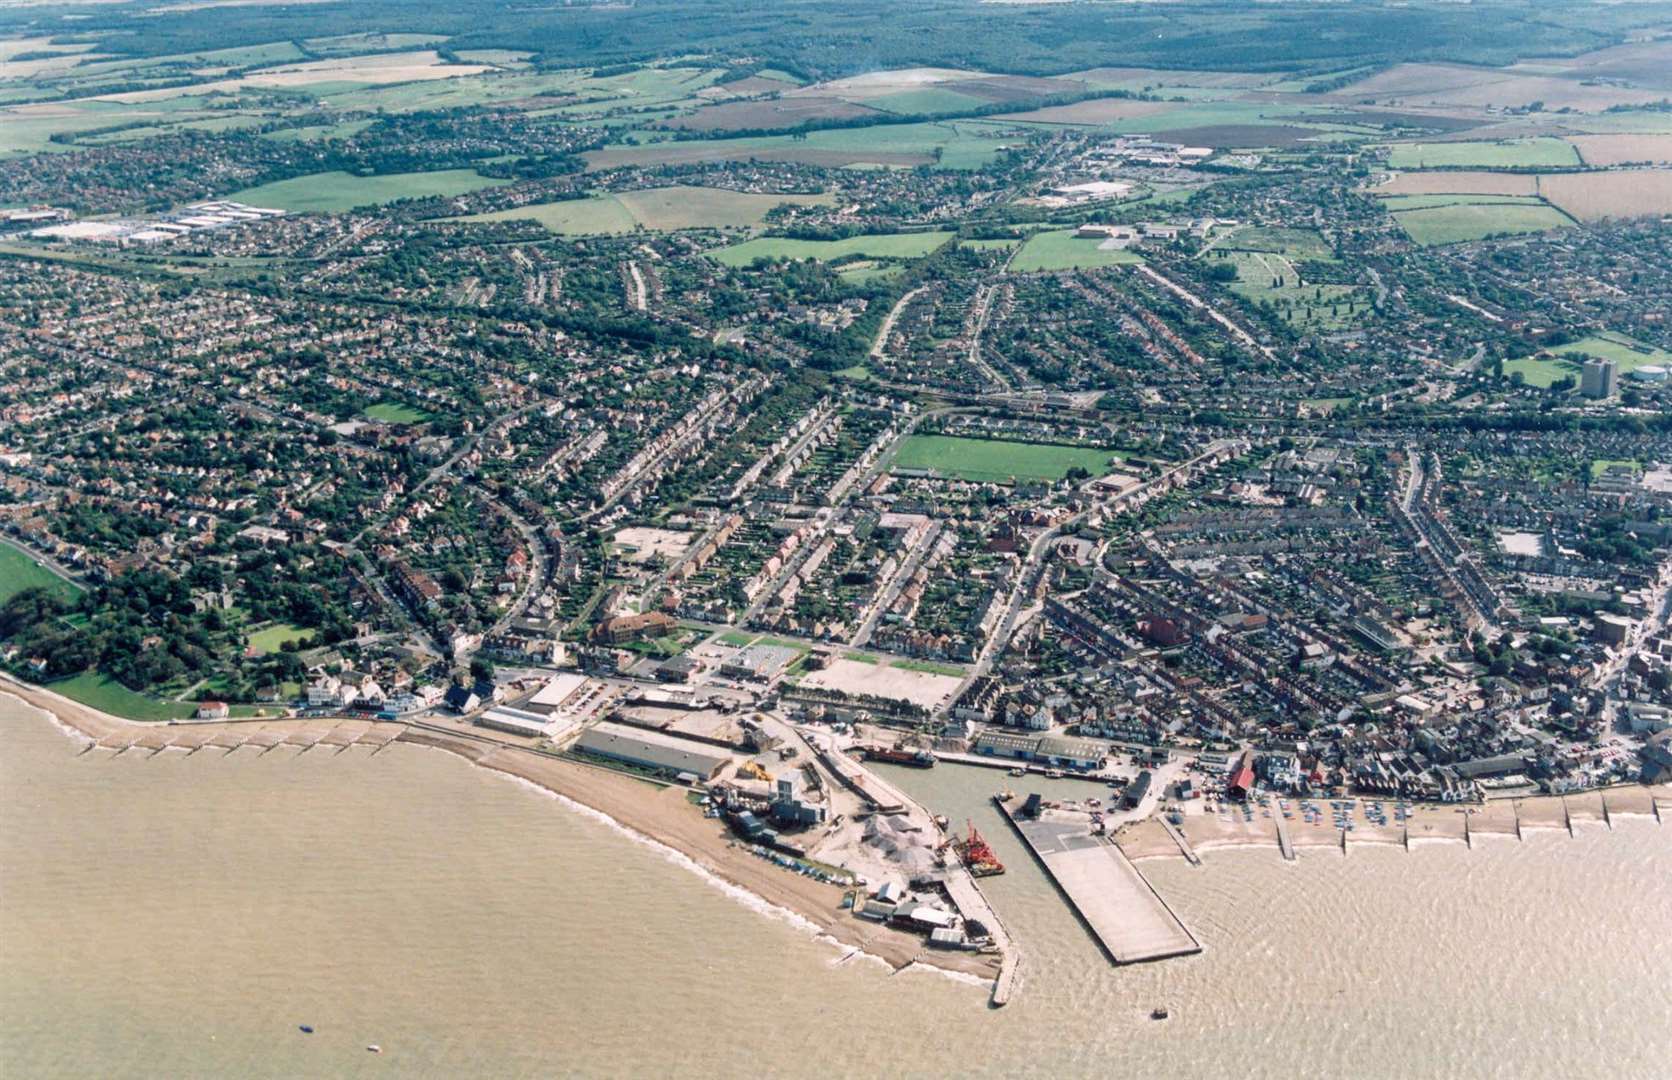 Aerial view of Whitstable Harbour from 1995 - just as the seeds of its revival were being sown